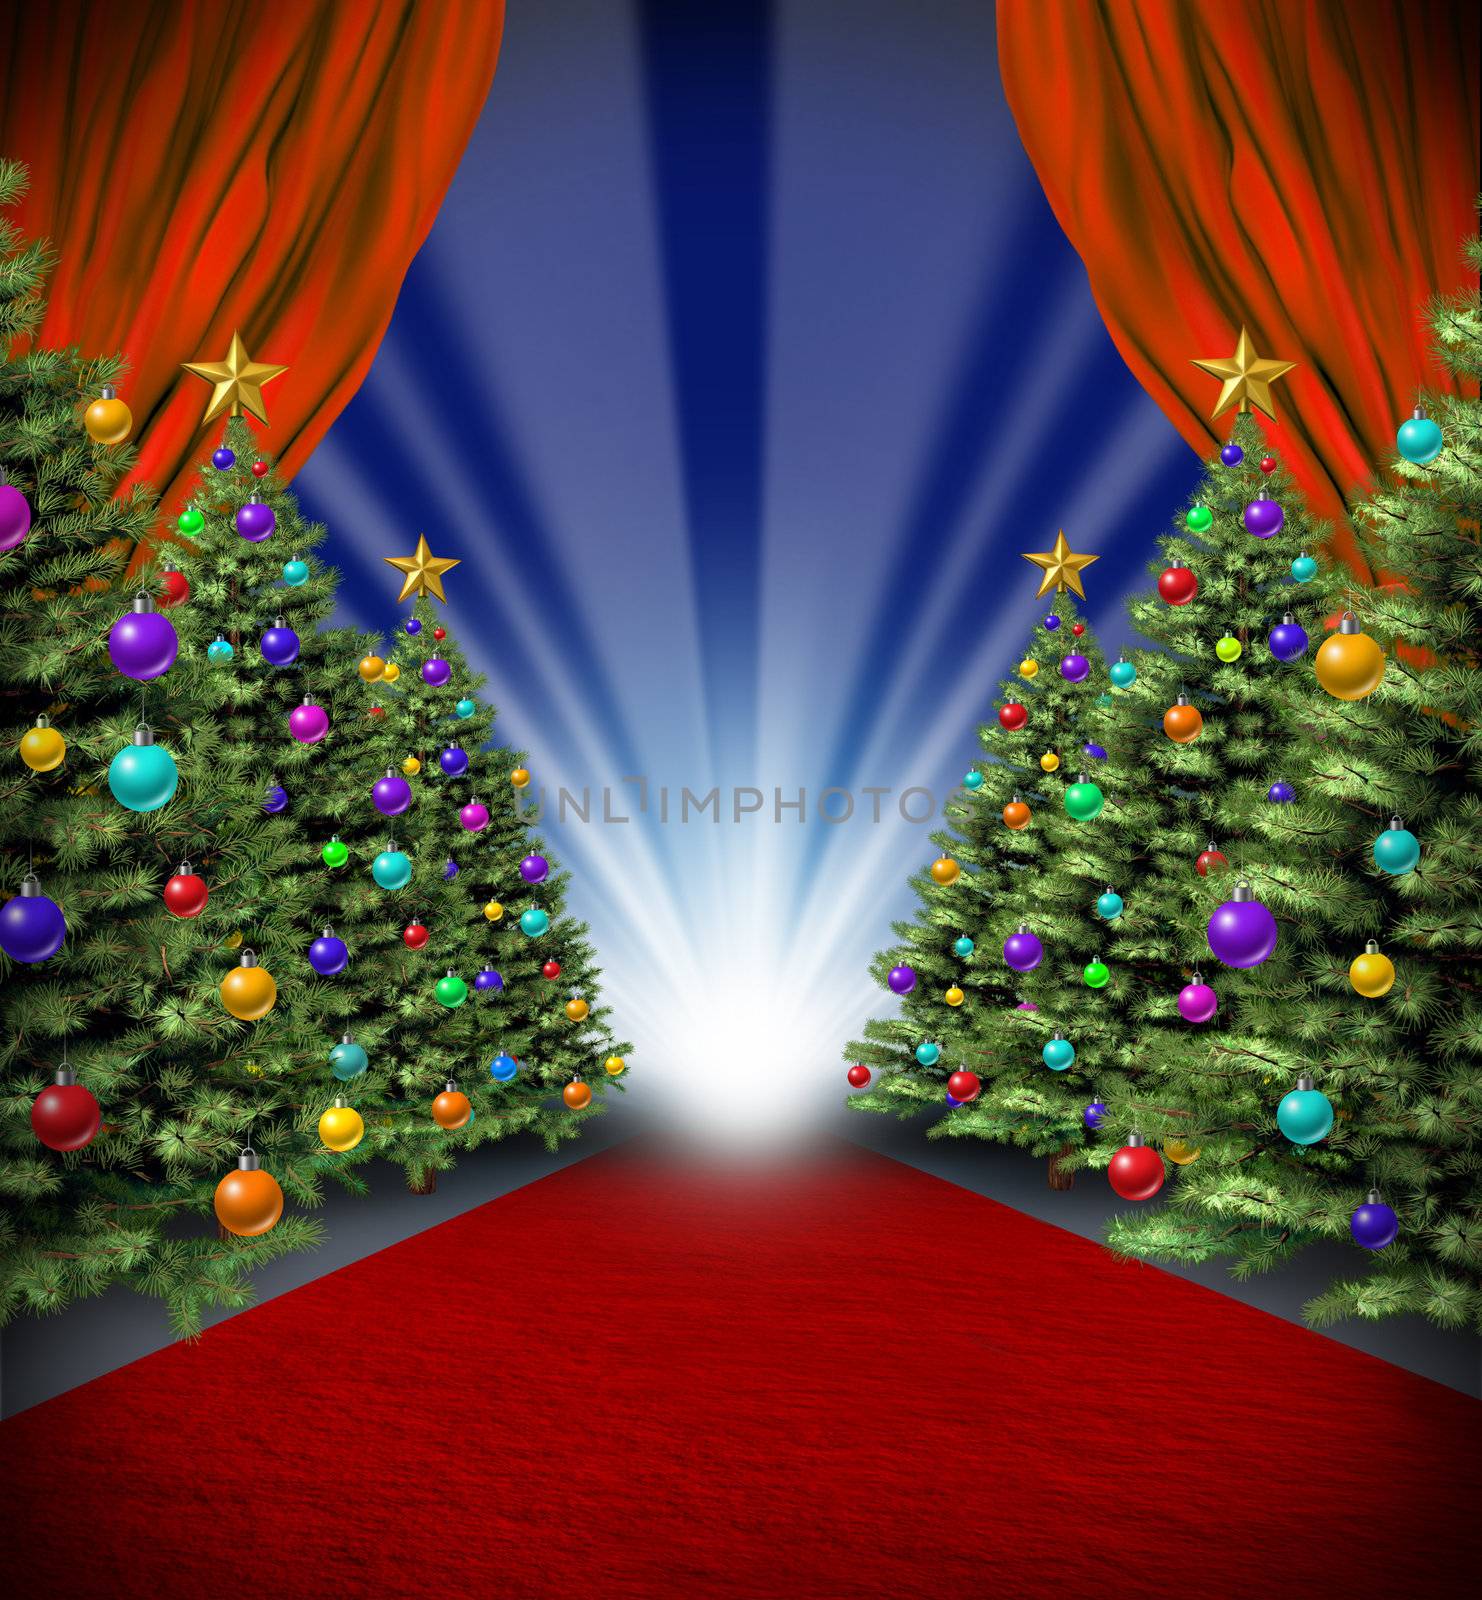 Red carpet holidays with curtains and Christmas trees with decorative ornaments for a Hollywood winter season premier and grand opening movie celebration and new year blockbuster theatrical performance.